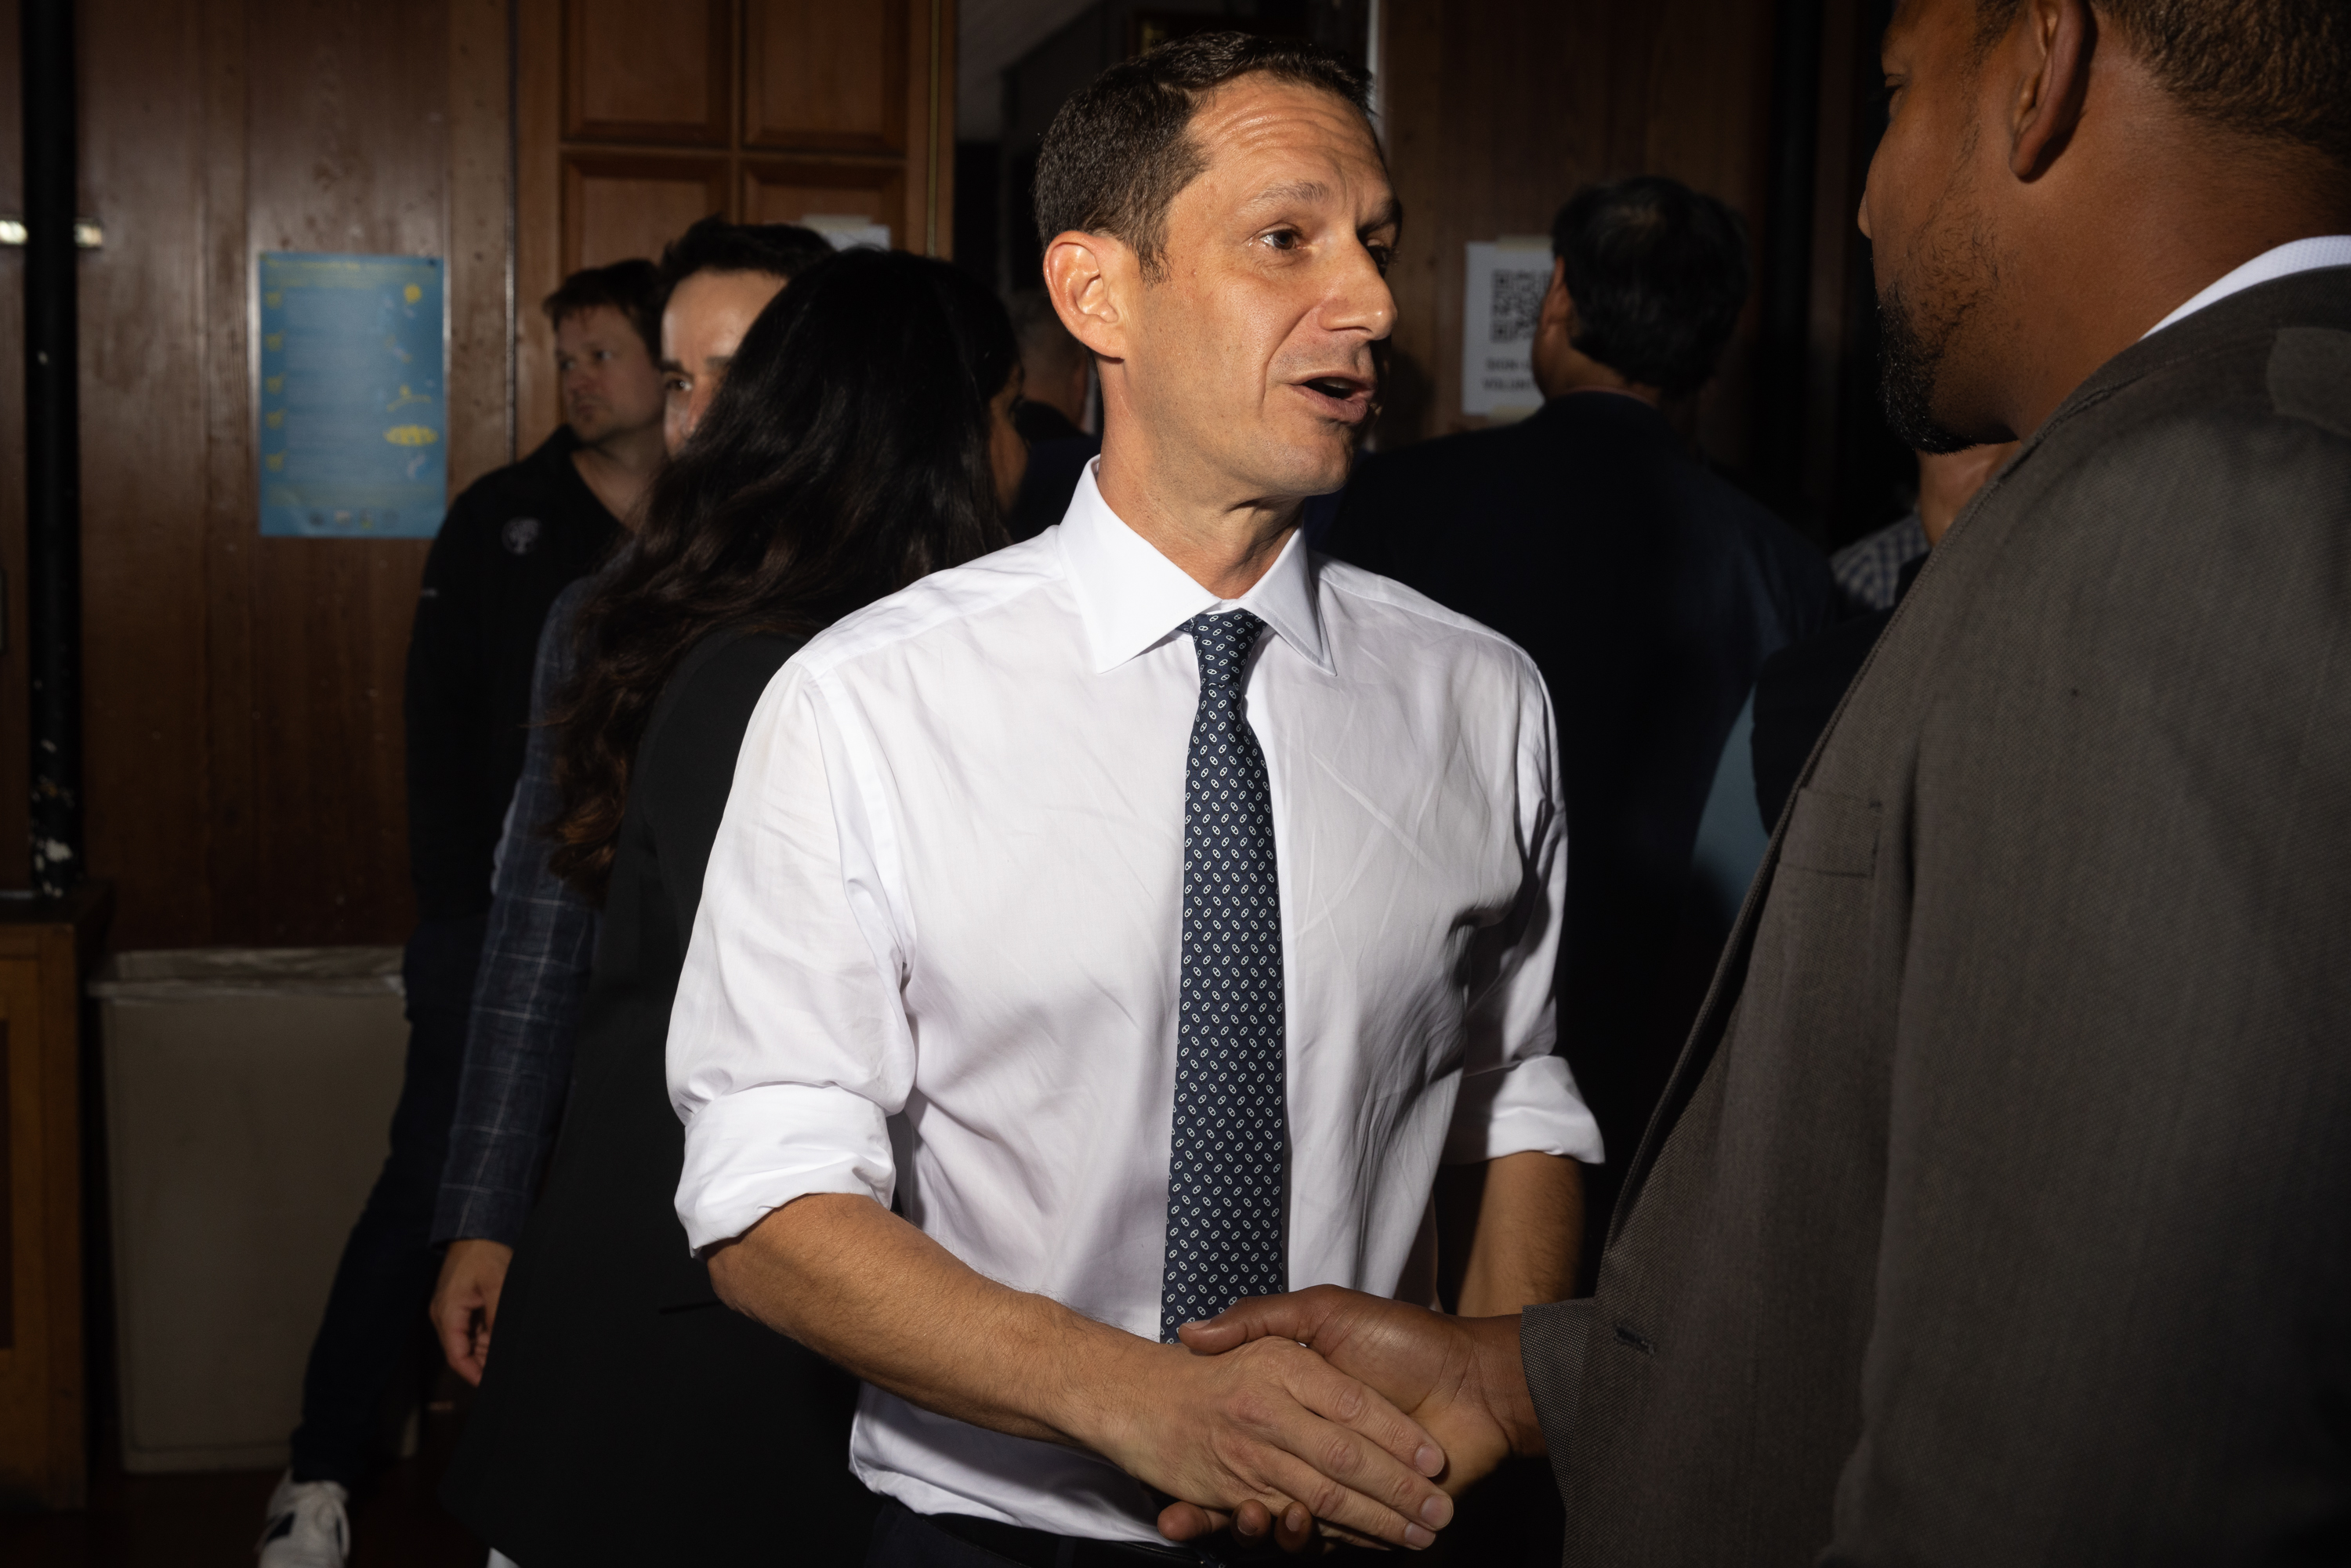 A man in a tie shakes hands with an attendee at a political event. 